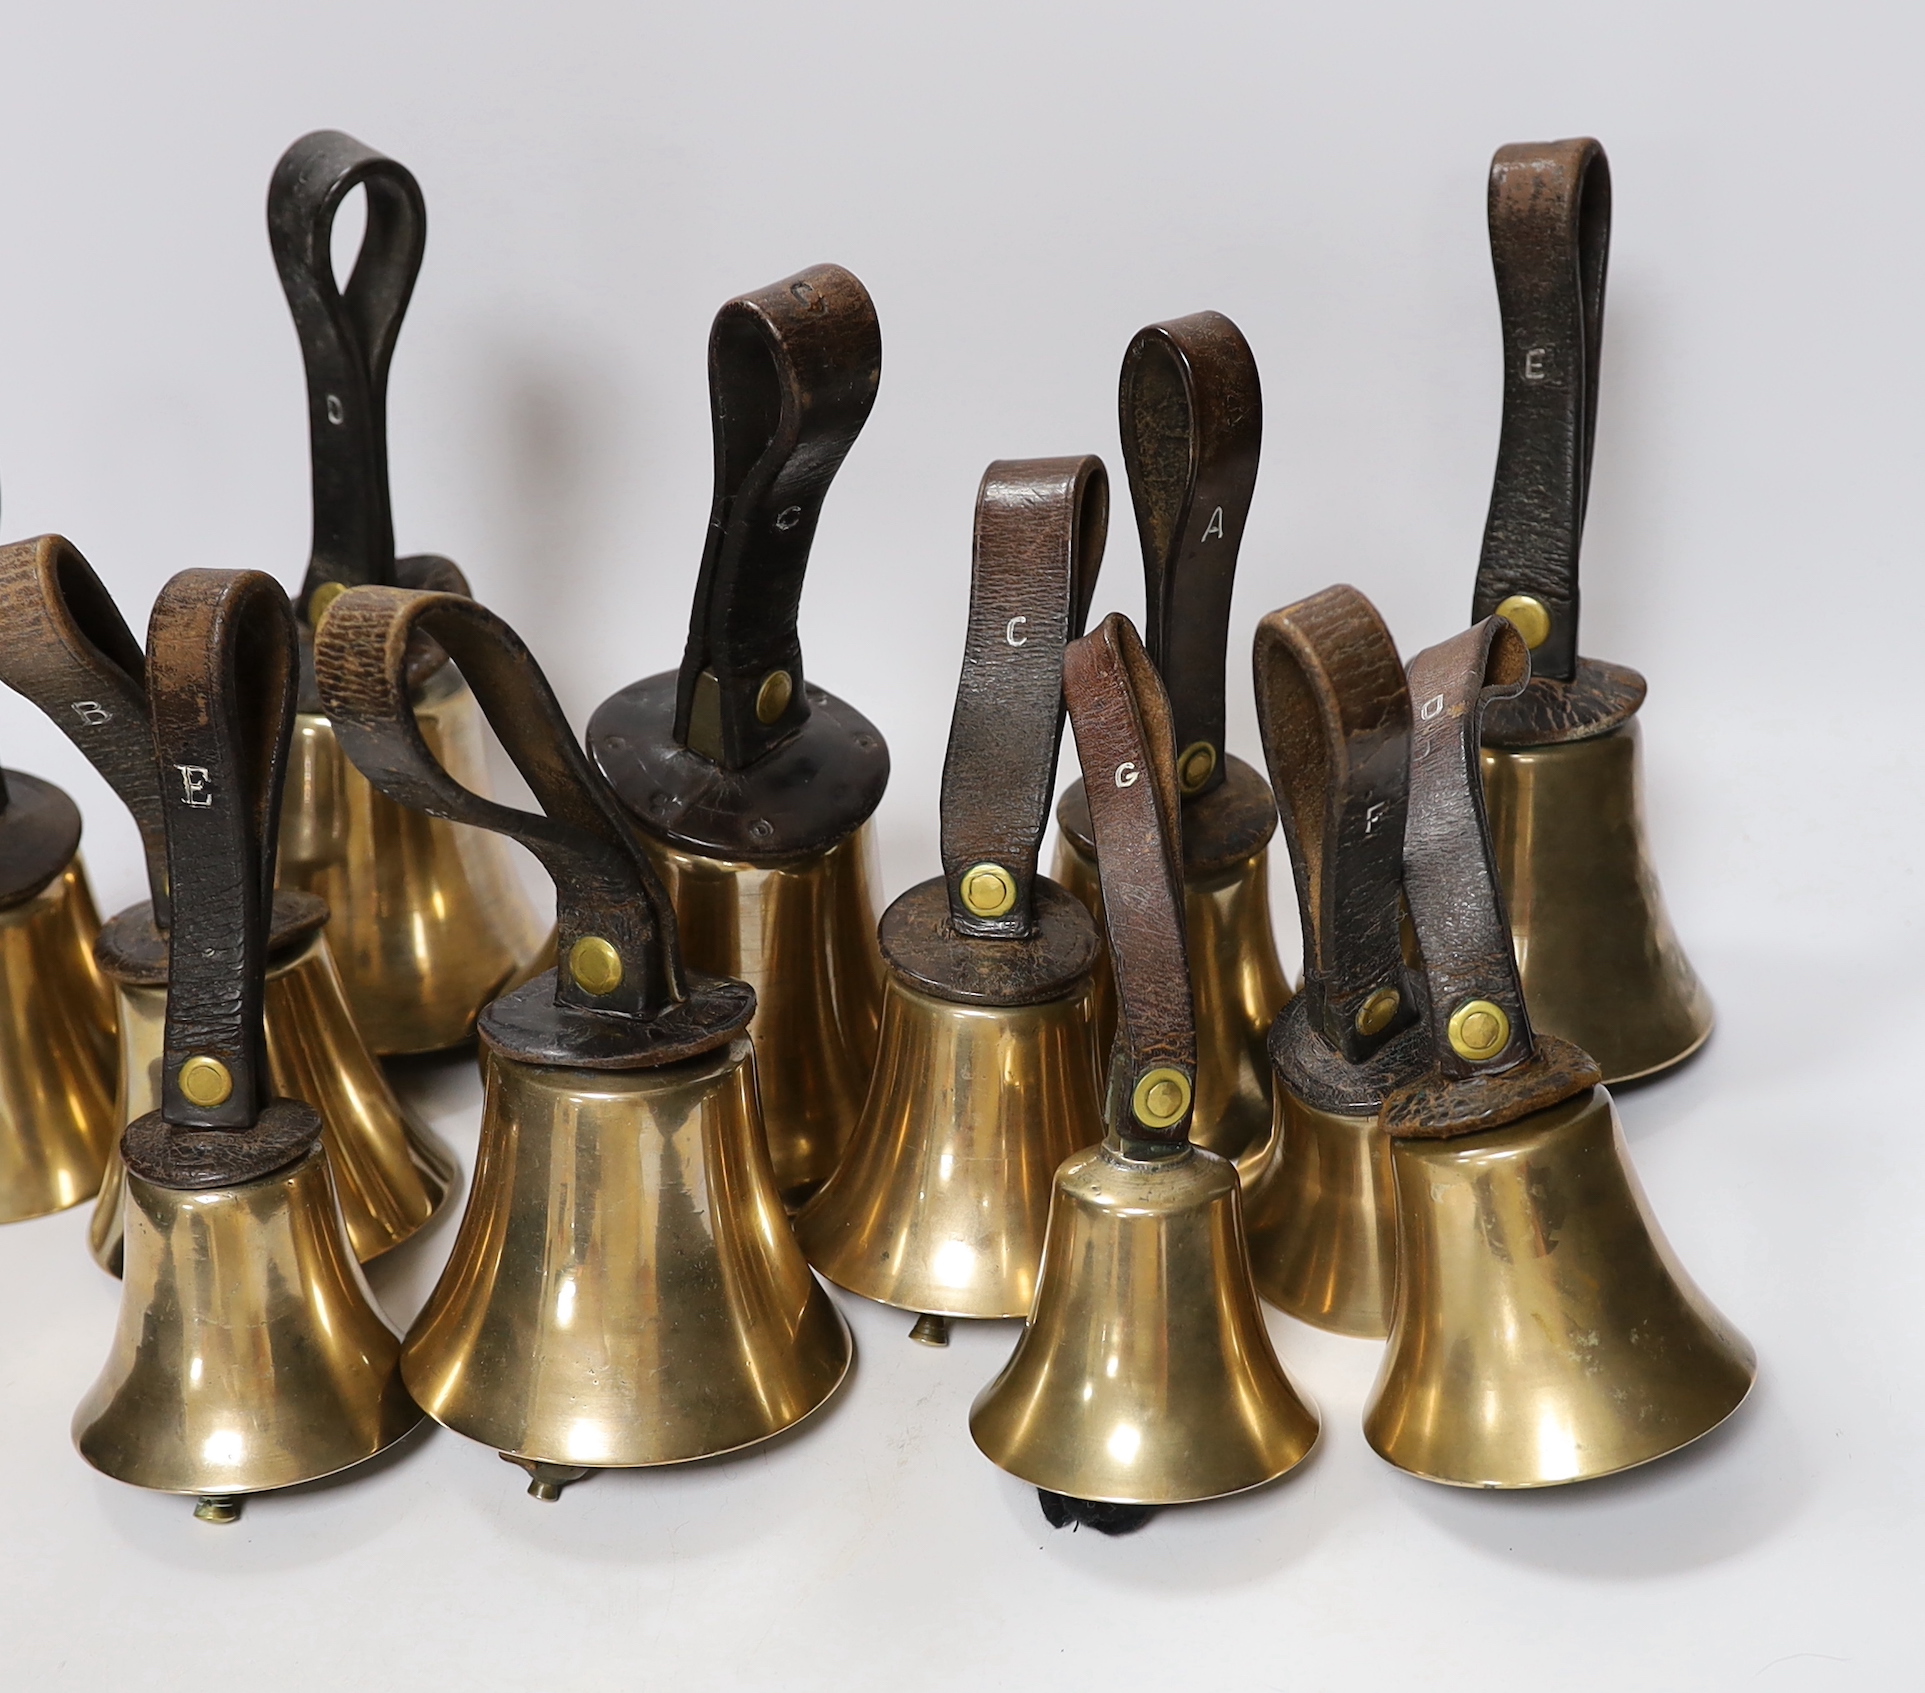 A set of thirty two musical handbells, full chromatic scale, circa 1900, largest 23cm, including leather strap